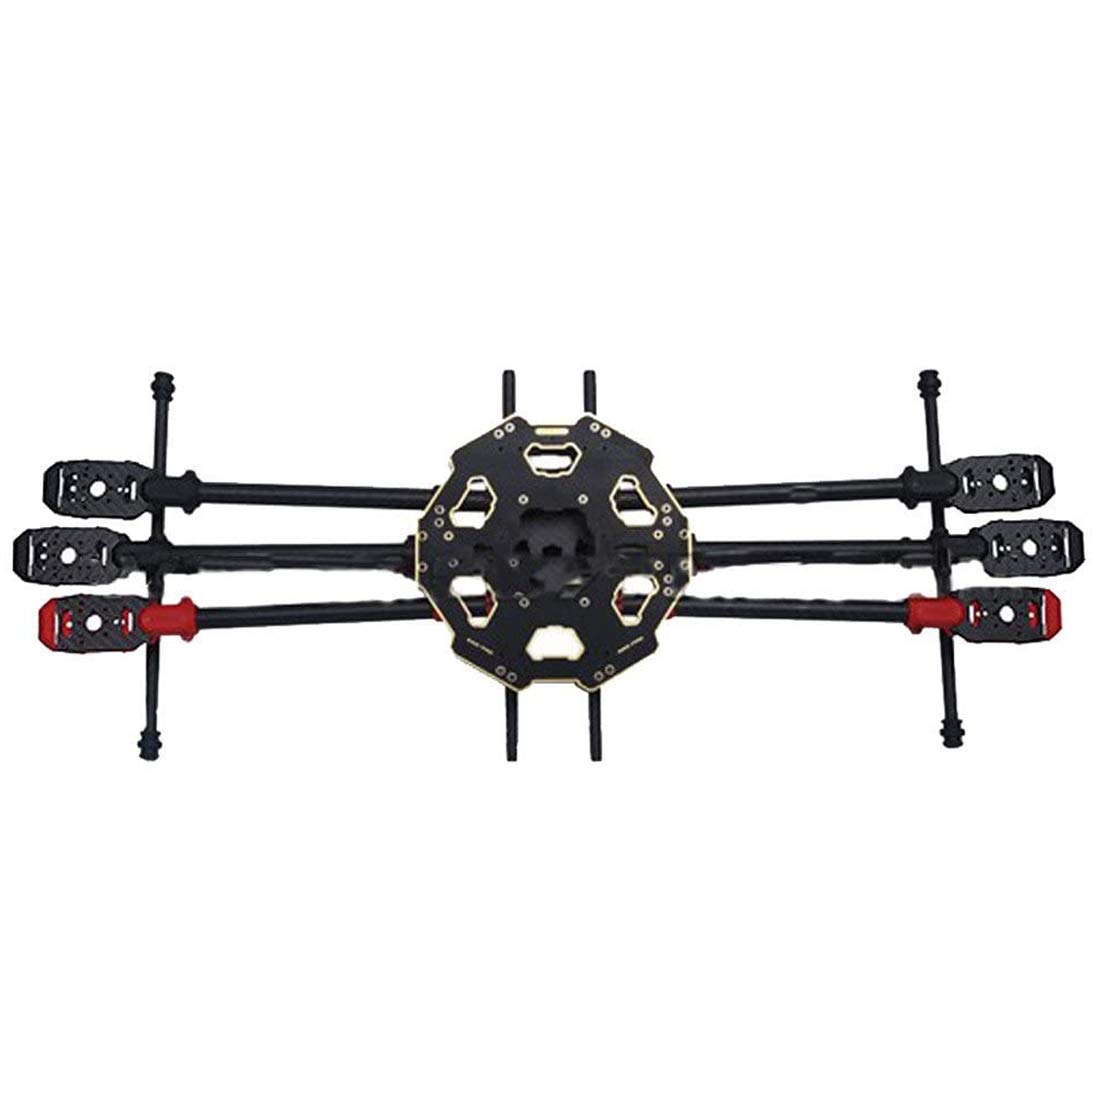 TAROT 680PRO Six-axis Folding Hexacopter Aircraft Frame Kit TL68P00 695MM 6-Axis Airframe for DIY Drone